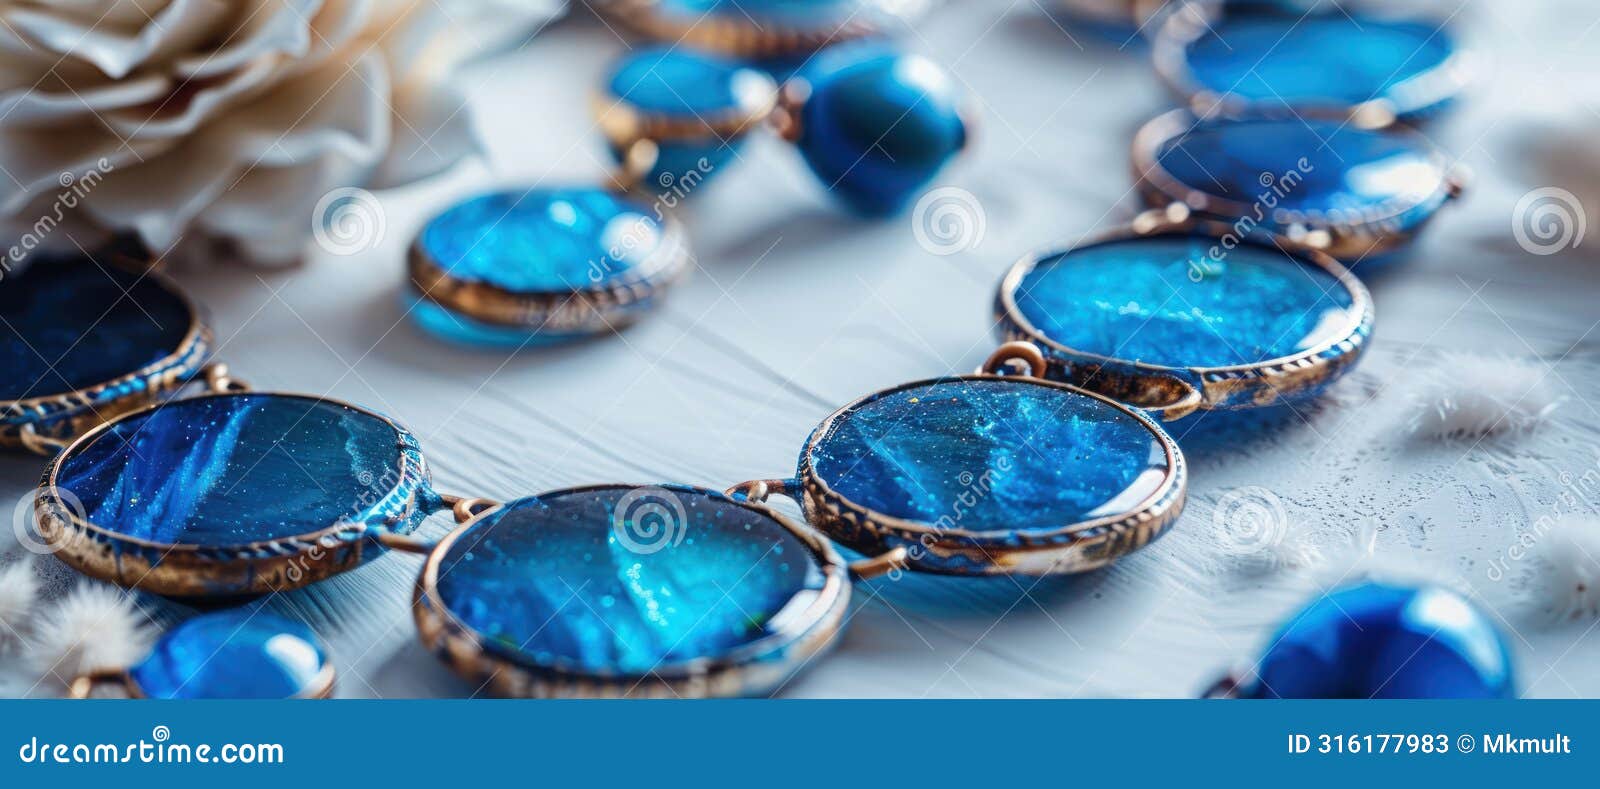 detailed close up of azure and ele necklace on table